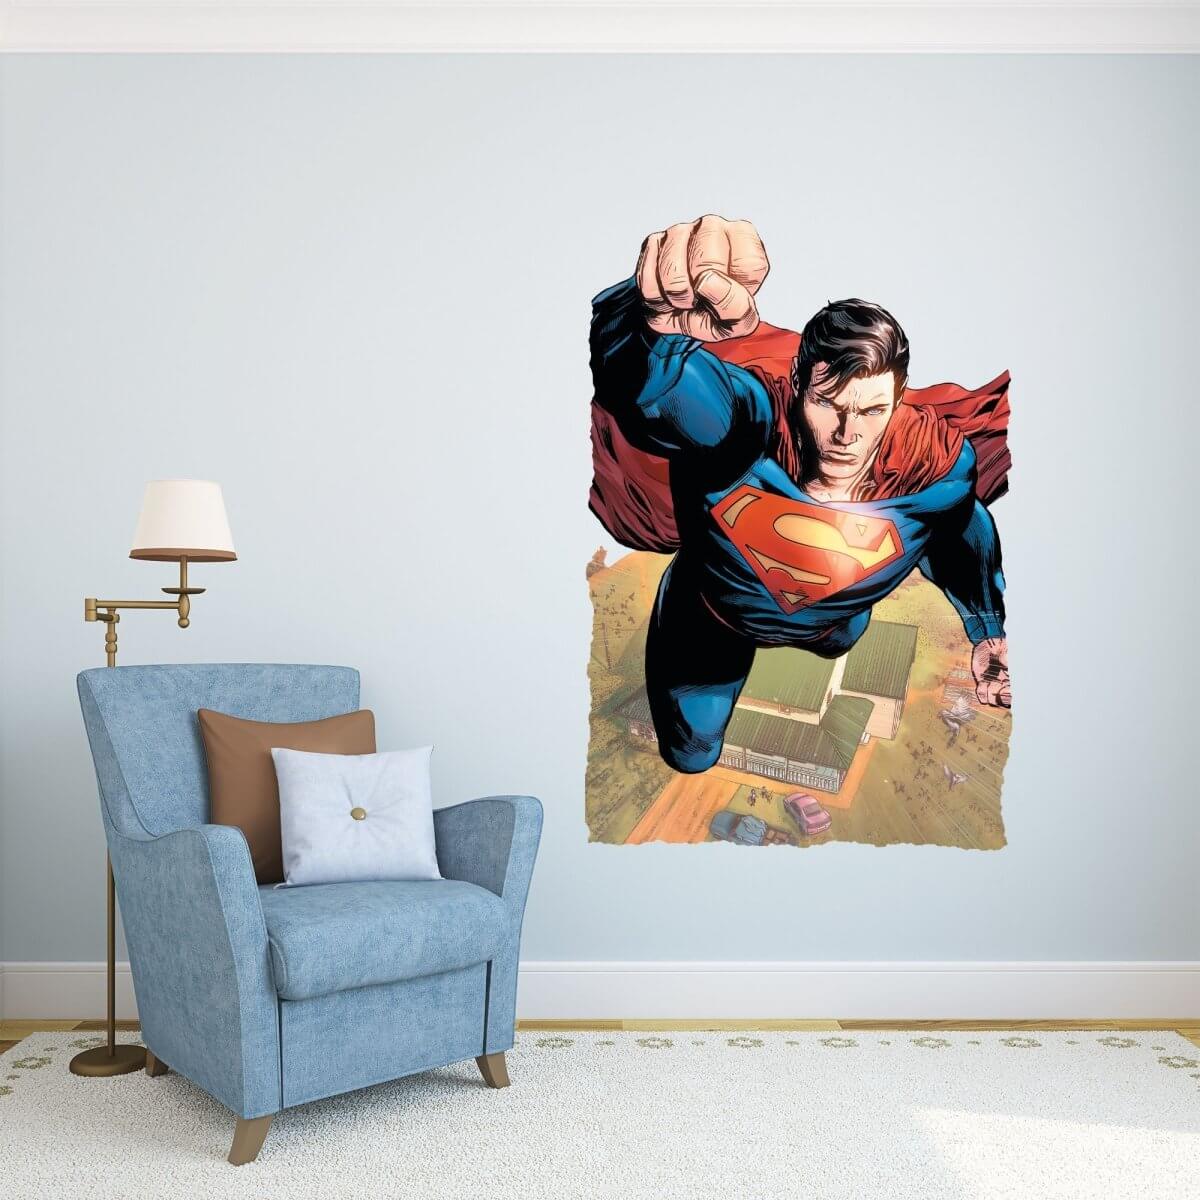 Kismet Decals Action Comics #957 Comic Cover Series Licensed Wall Sticker - Easy DIY Home & Room Decor Wall Art - Kismet Decals